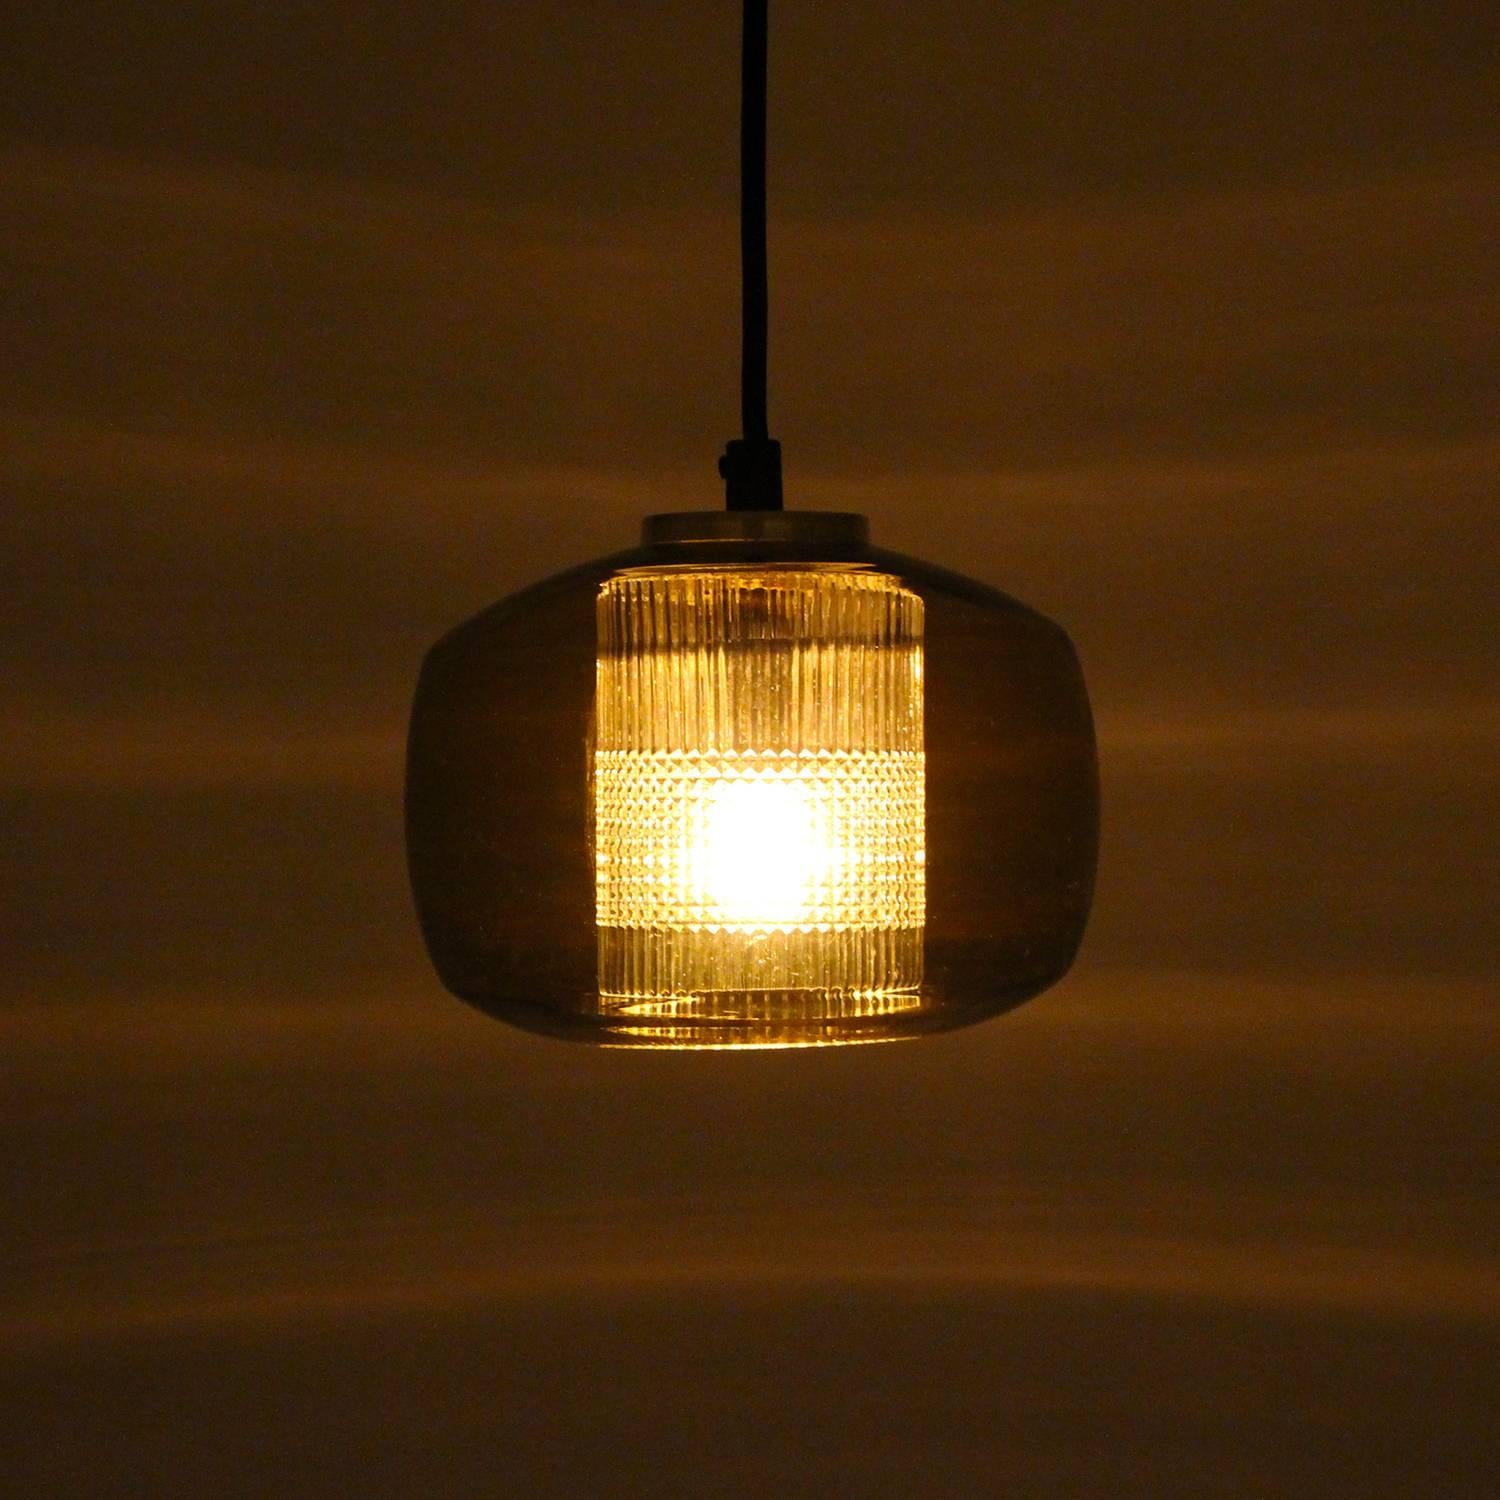 Amber crystal glass pendant light by unknown Scandinavian producer in the 1960s - vintage crystal glass ceiling light with brass top in very good, near excellent vintage condition.

This charming beauty is comprises by a light amber, almost